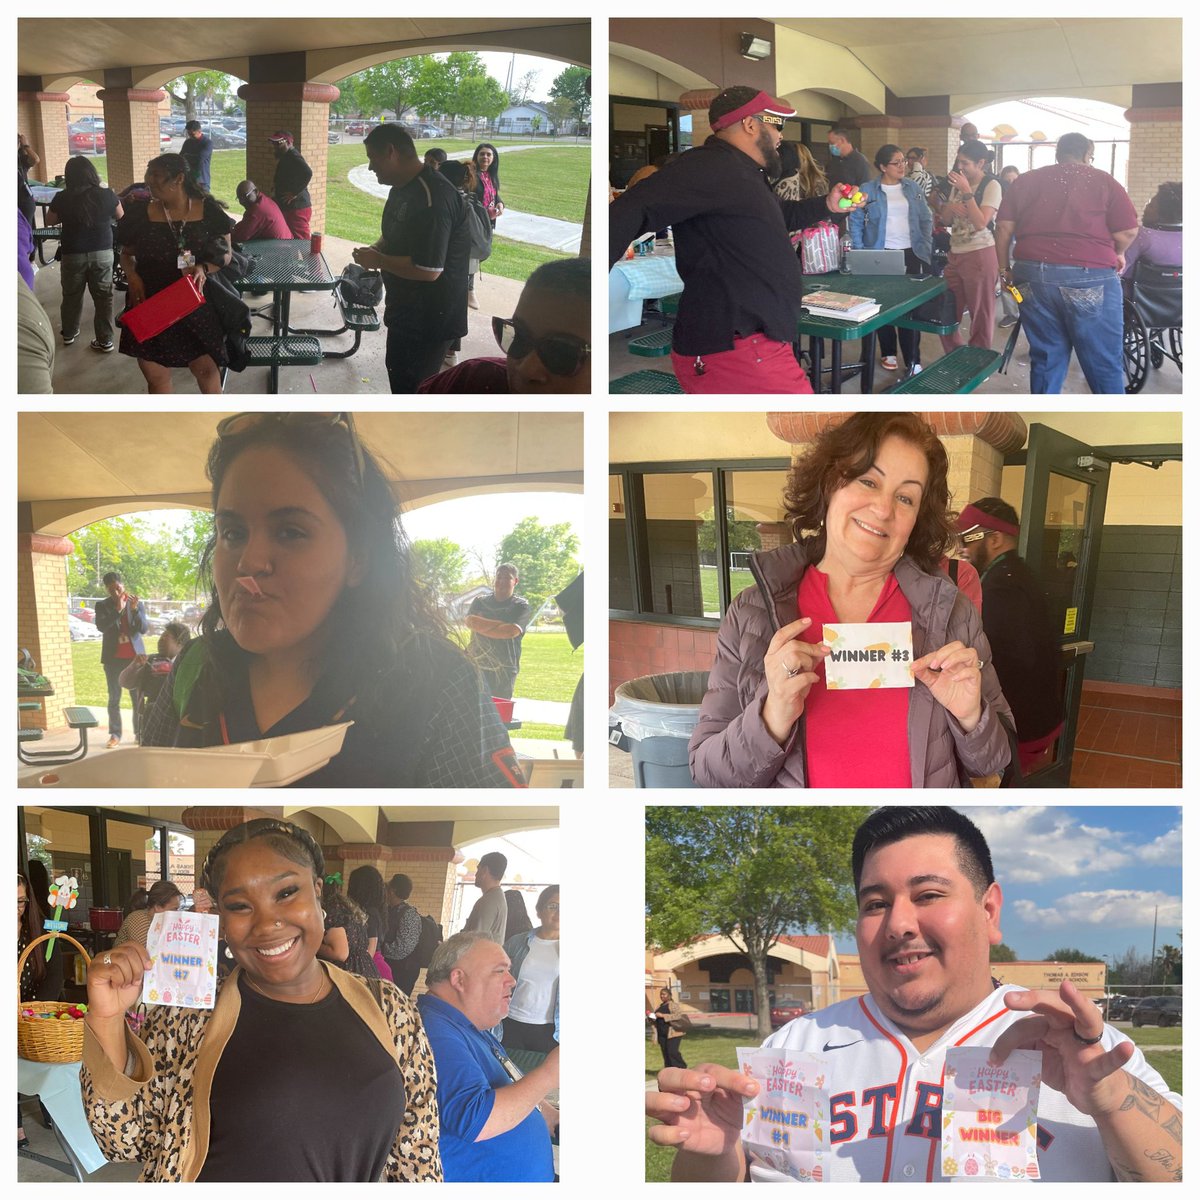 After our Thursday planning, the Edison Rangers were treated with Ice-cream Sunday and an Egg Hunt!!!! Congrats to our lucky winners! Happy Easter from the Edsion Team! @MrGuzmanHISD @maiyamoore26 @SNGonzalez7 @donawhi @TeamHISD @HoustonISD